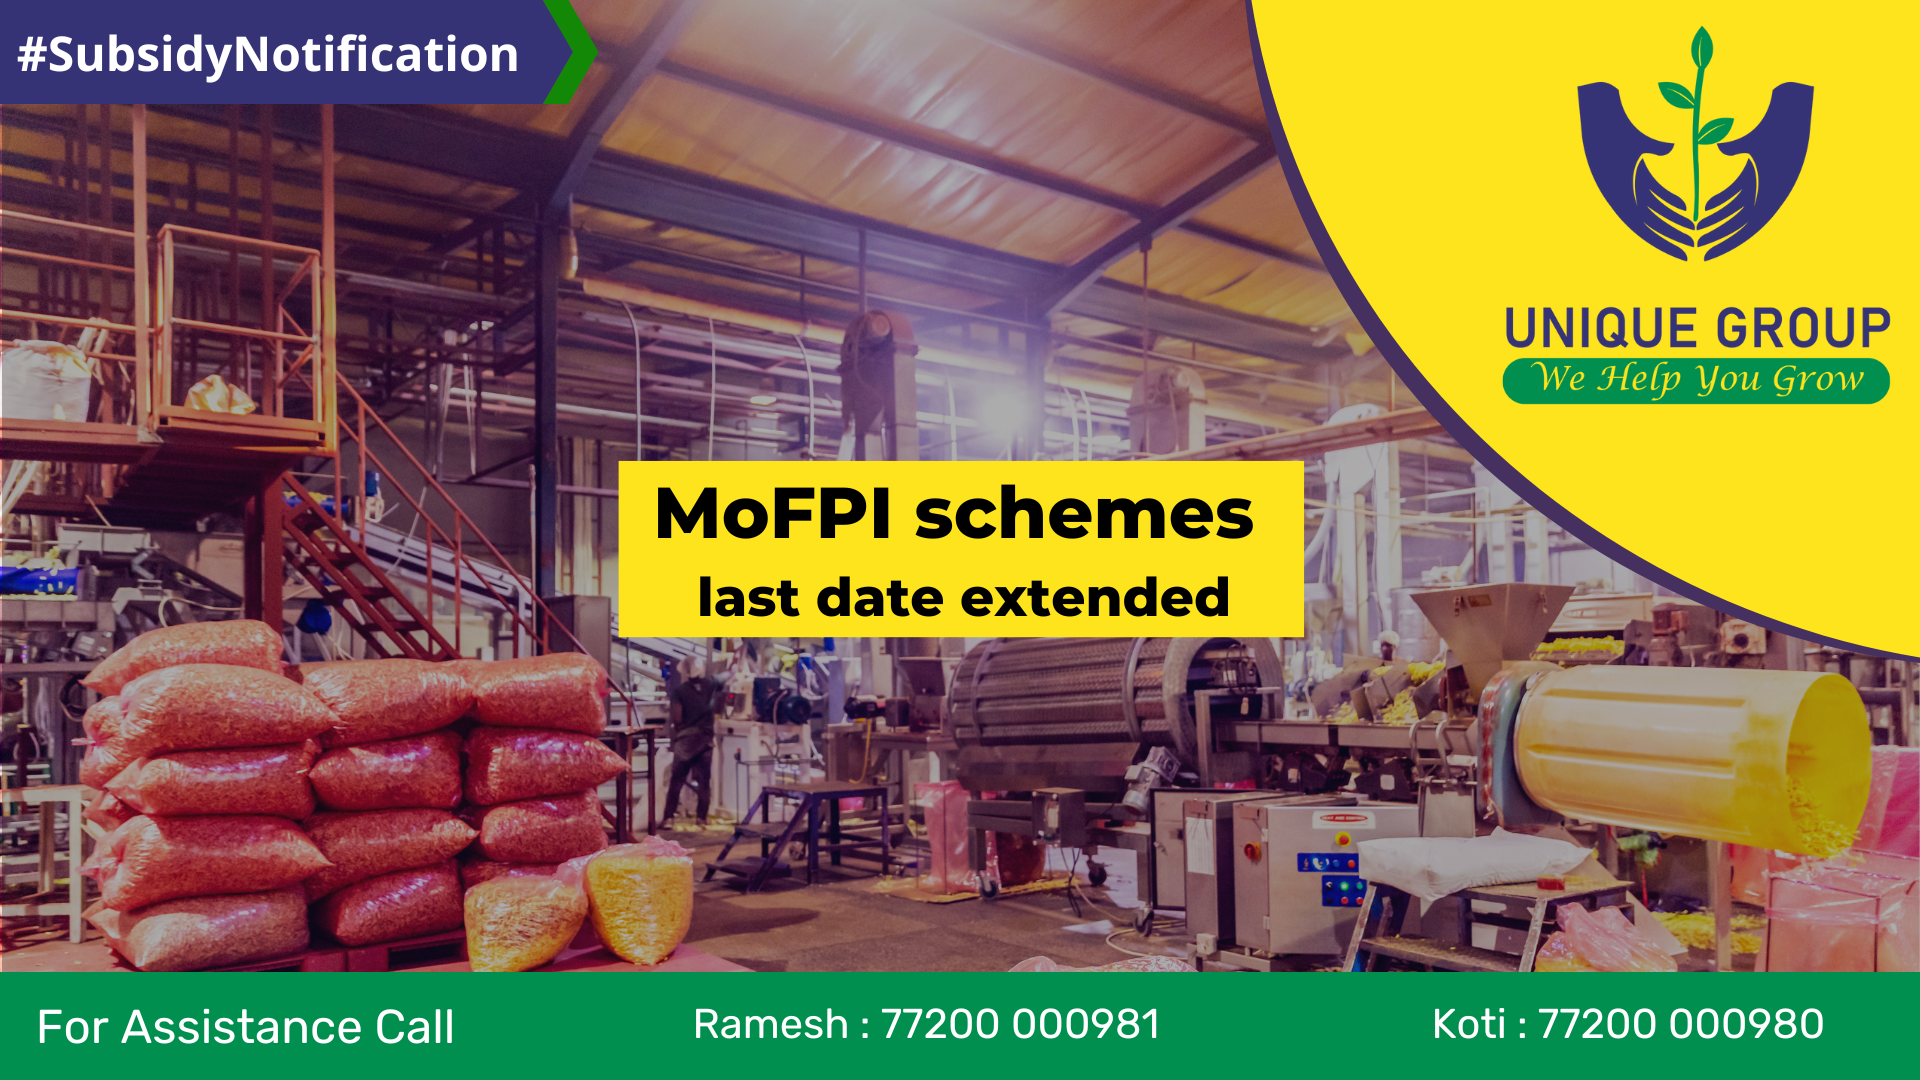 MoFPI schemes last date extended